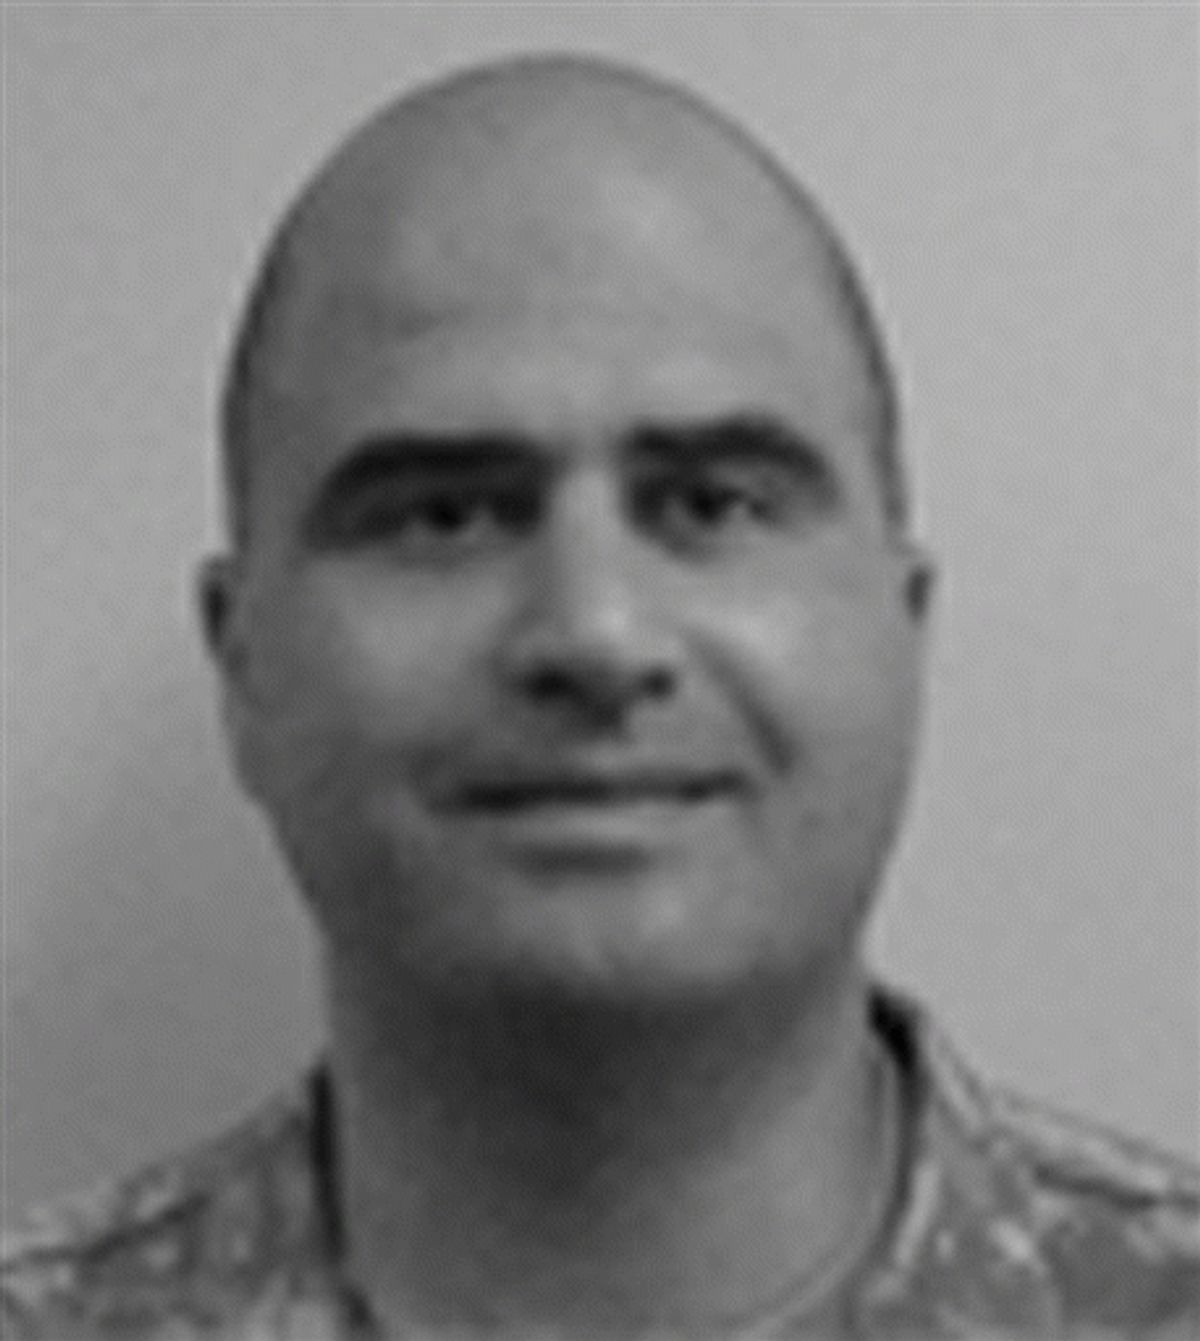 This photo from the Center for the Study of Traumatic Stress Web Site shows Nidal Malik Hasan.  